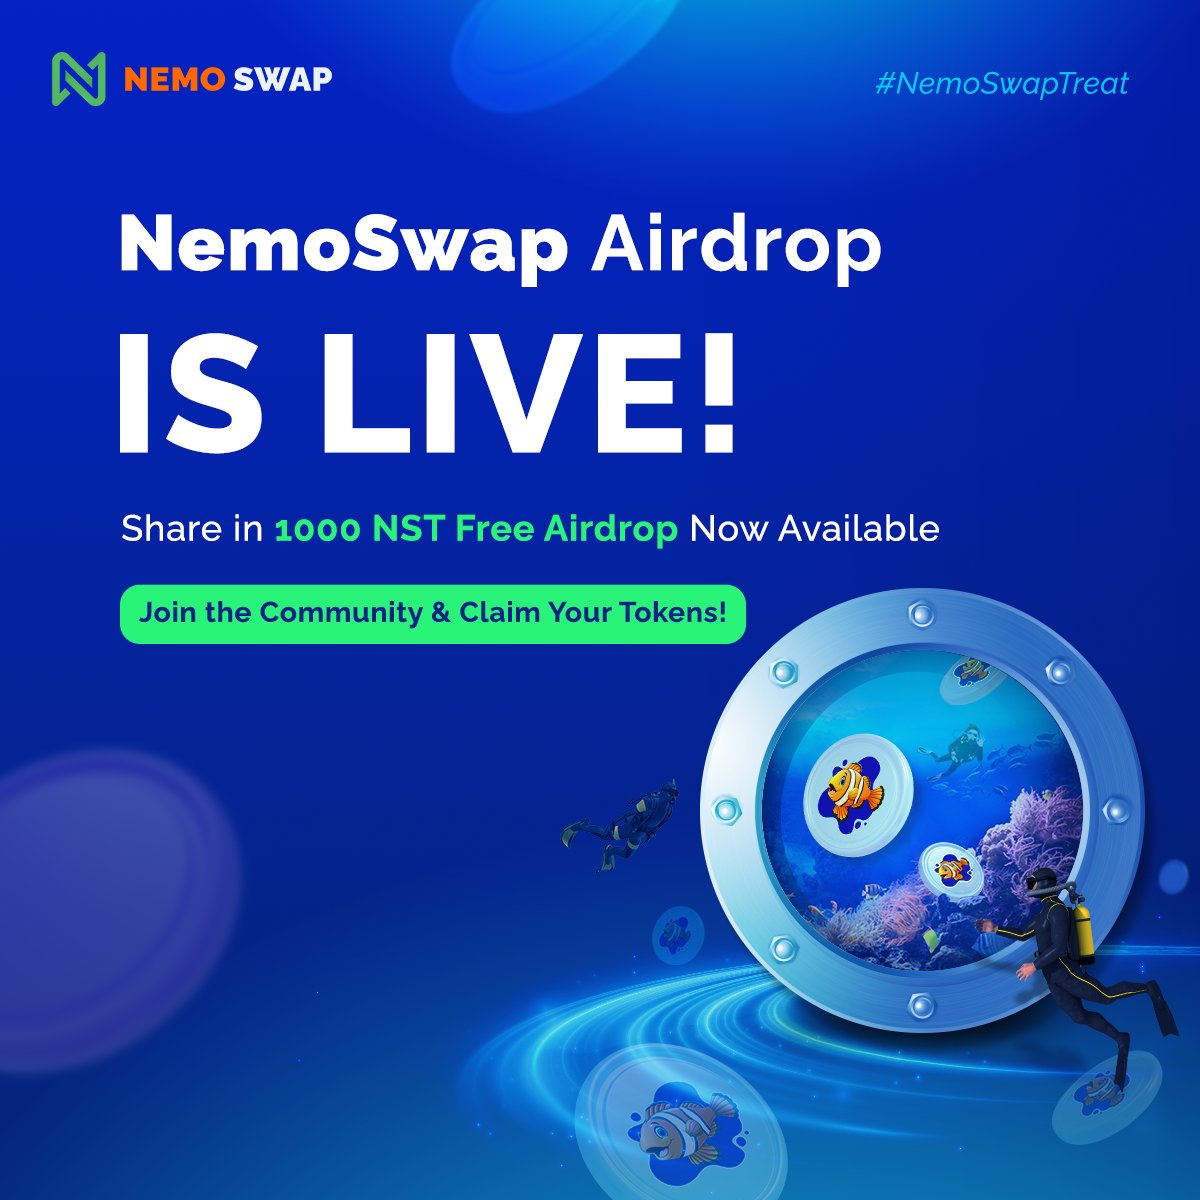 🚀 Phase 1 is now live! Join the #NemoSwapTreat (NST) Airdrop today! 🎉 Secure your share of 300 #NST tokens as a special thank you from us Hurry, limited spots & only 2 days left to complete the missions! Learn more: 🇬🇧EN: renec.foundation/blog/nst-airdr… 🇻🇳VN: renec.foundation/vi/blog/nst-ai…